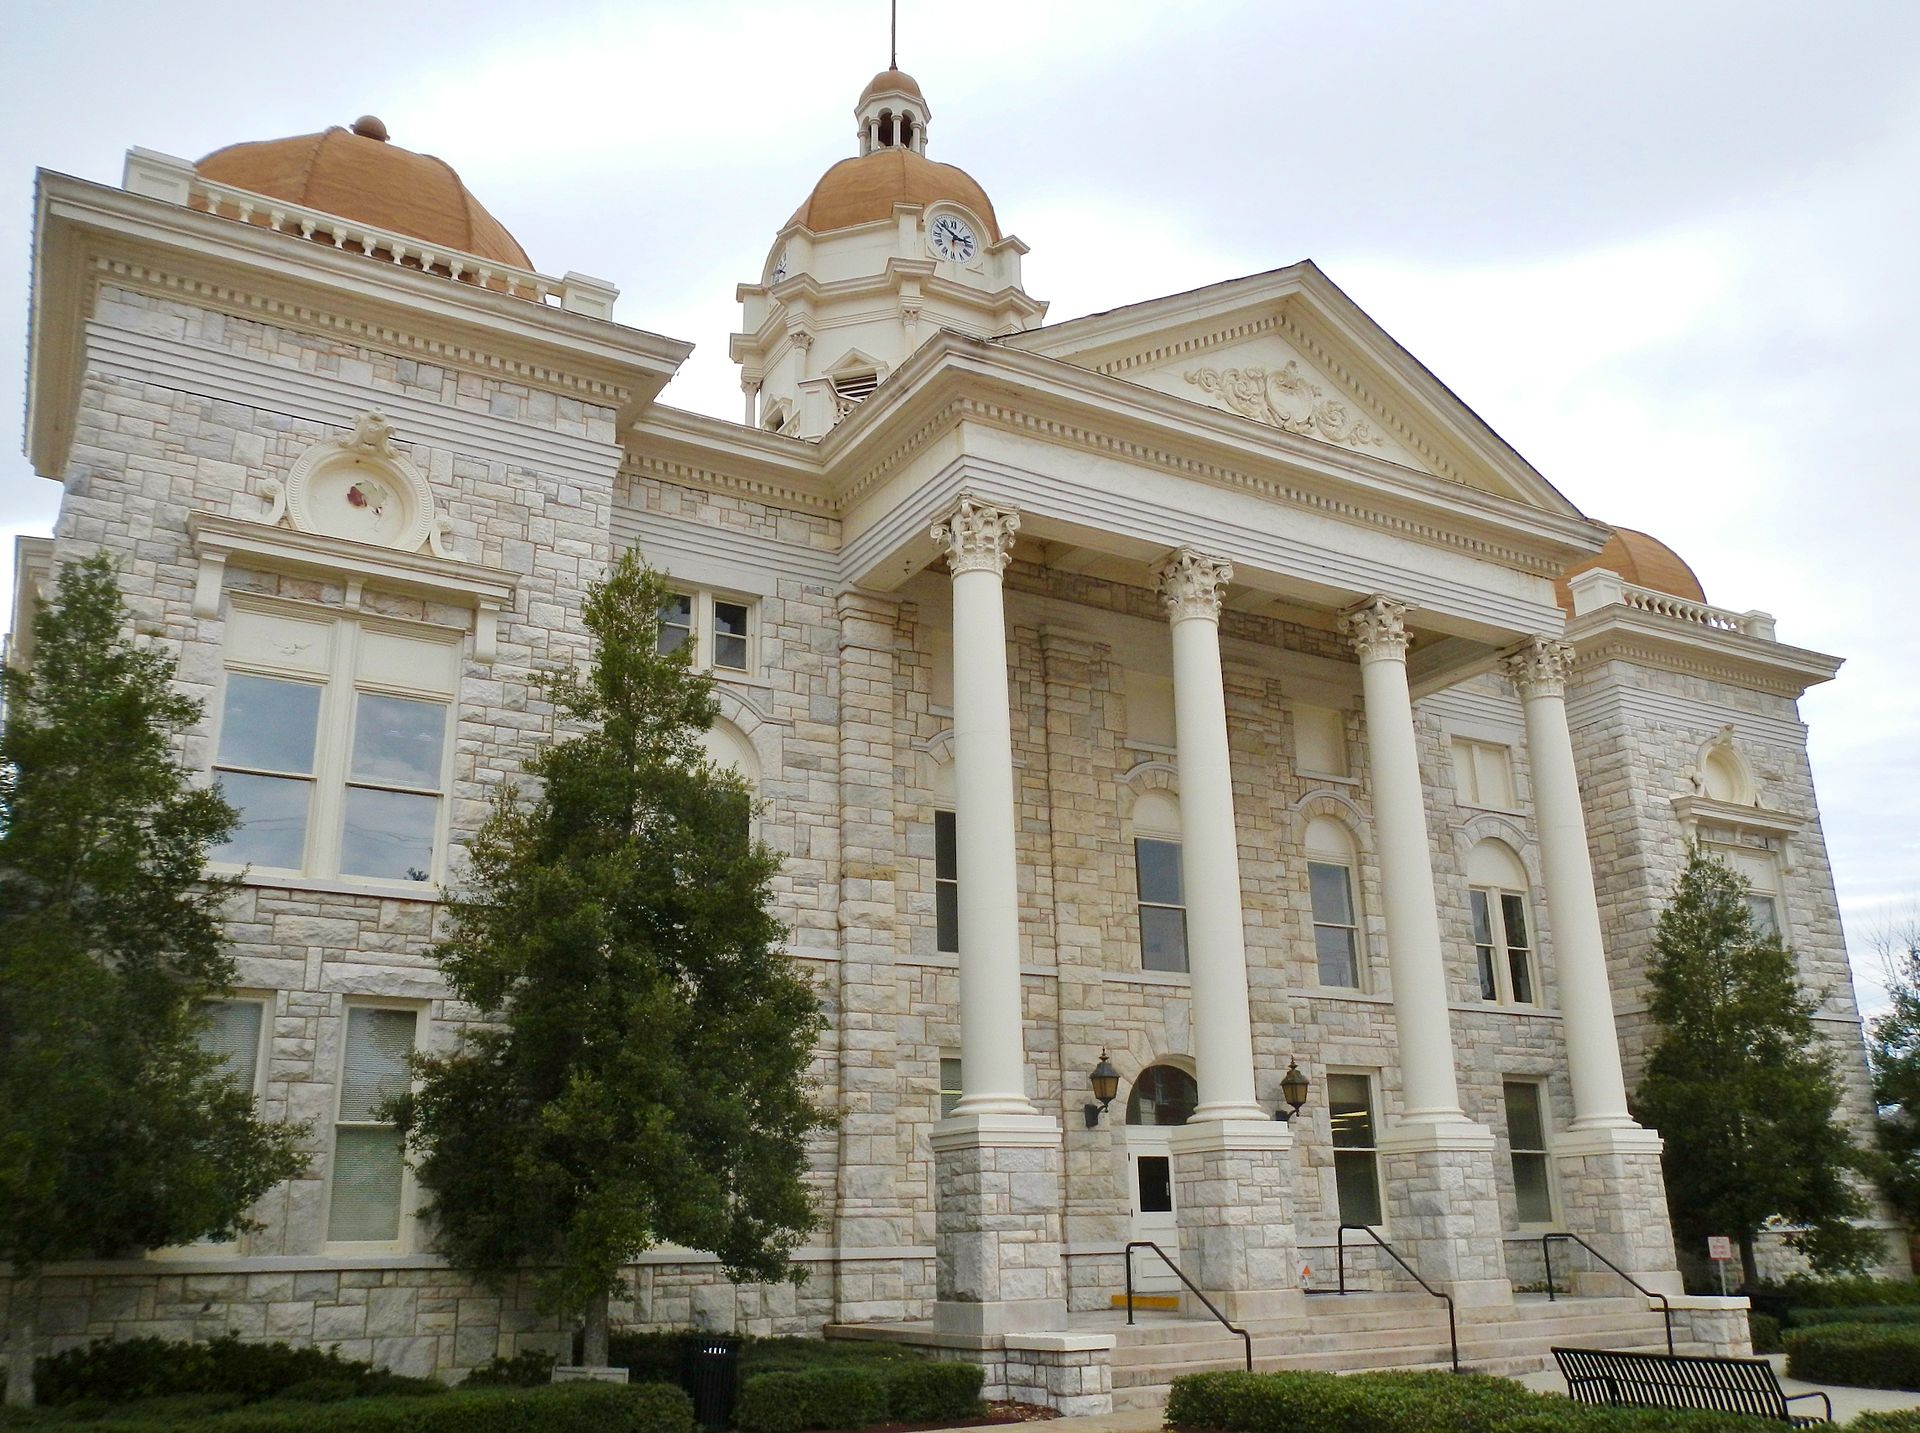 Shelby County Alabama Courthouse 4 things you need to know about Shelby County's plan for growth